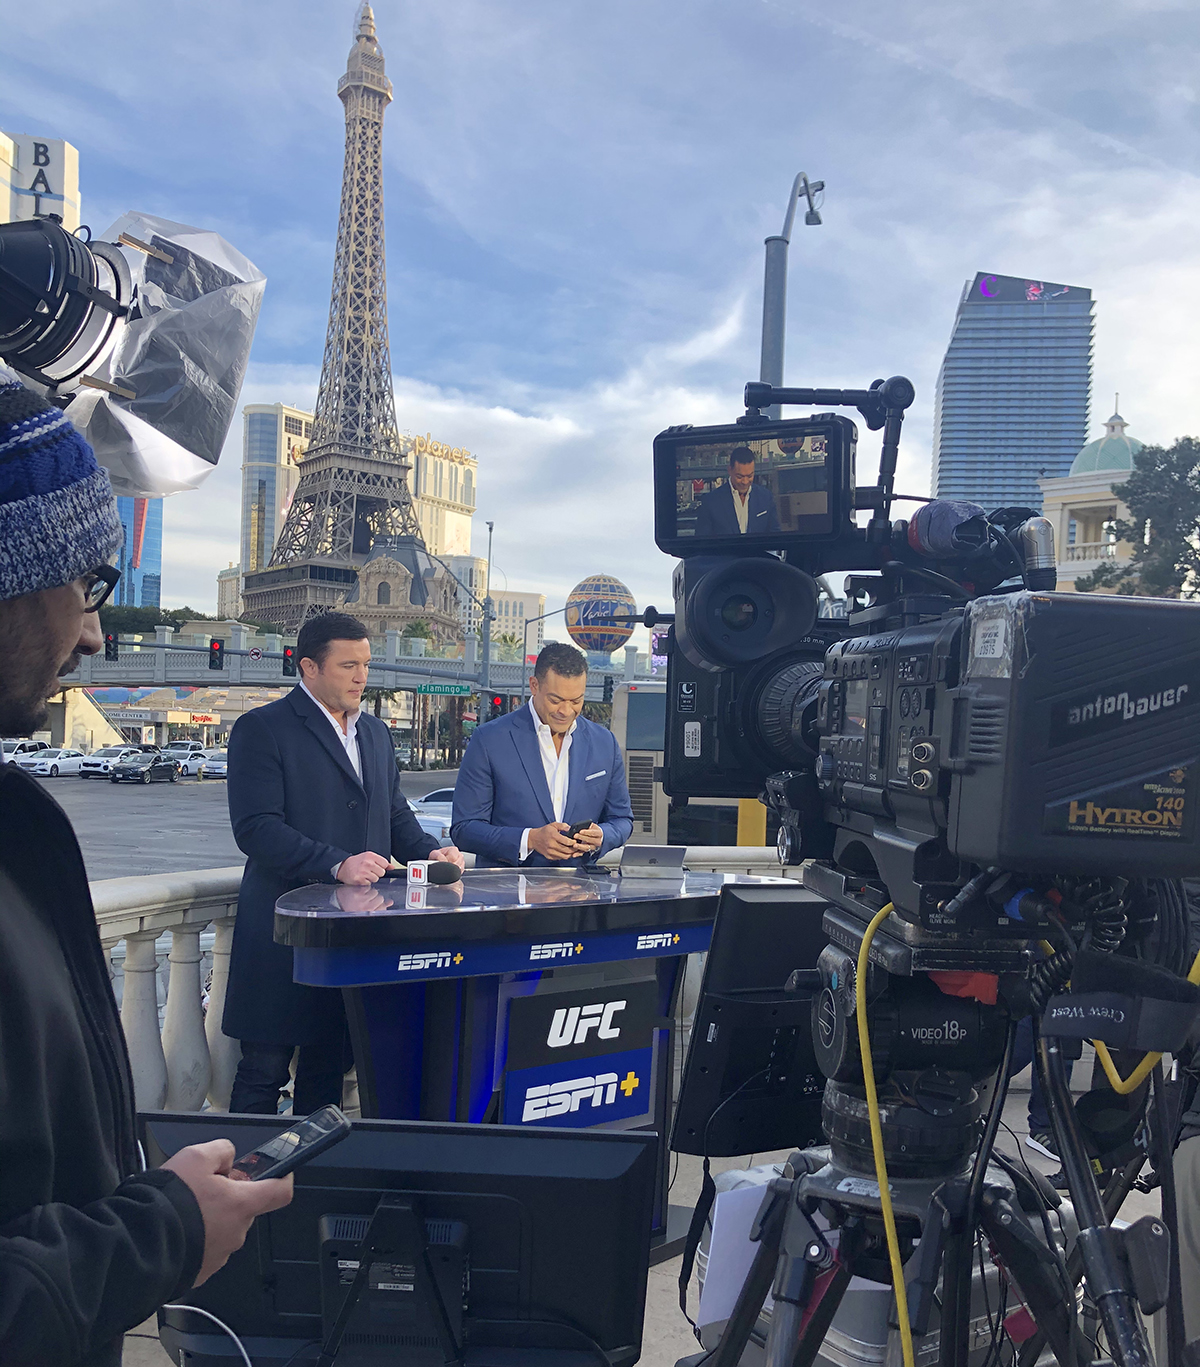 UFC 246: ESPN Stays Mobile for Week-Long Pre-Fight Coverage From Vegas